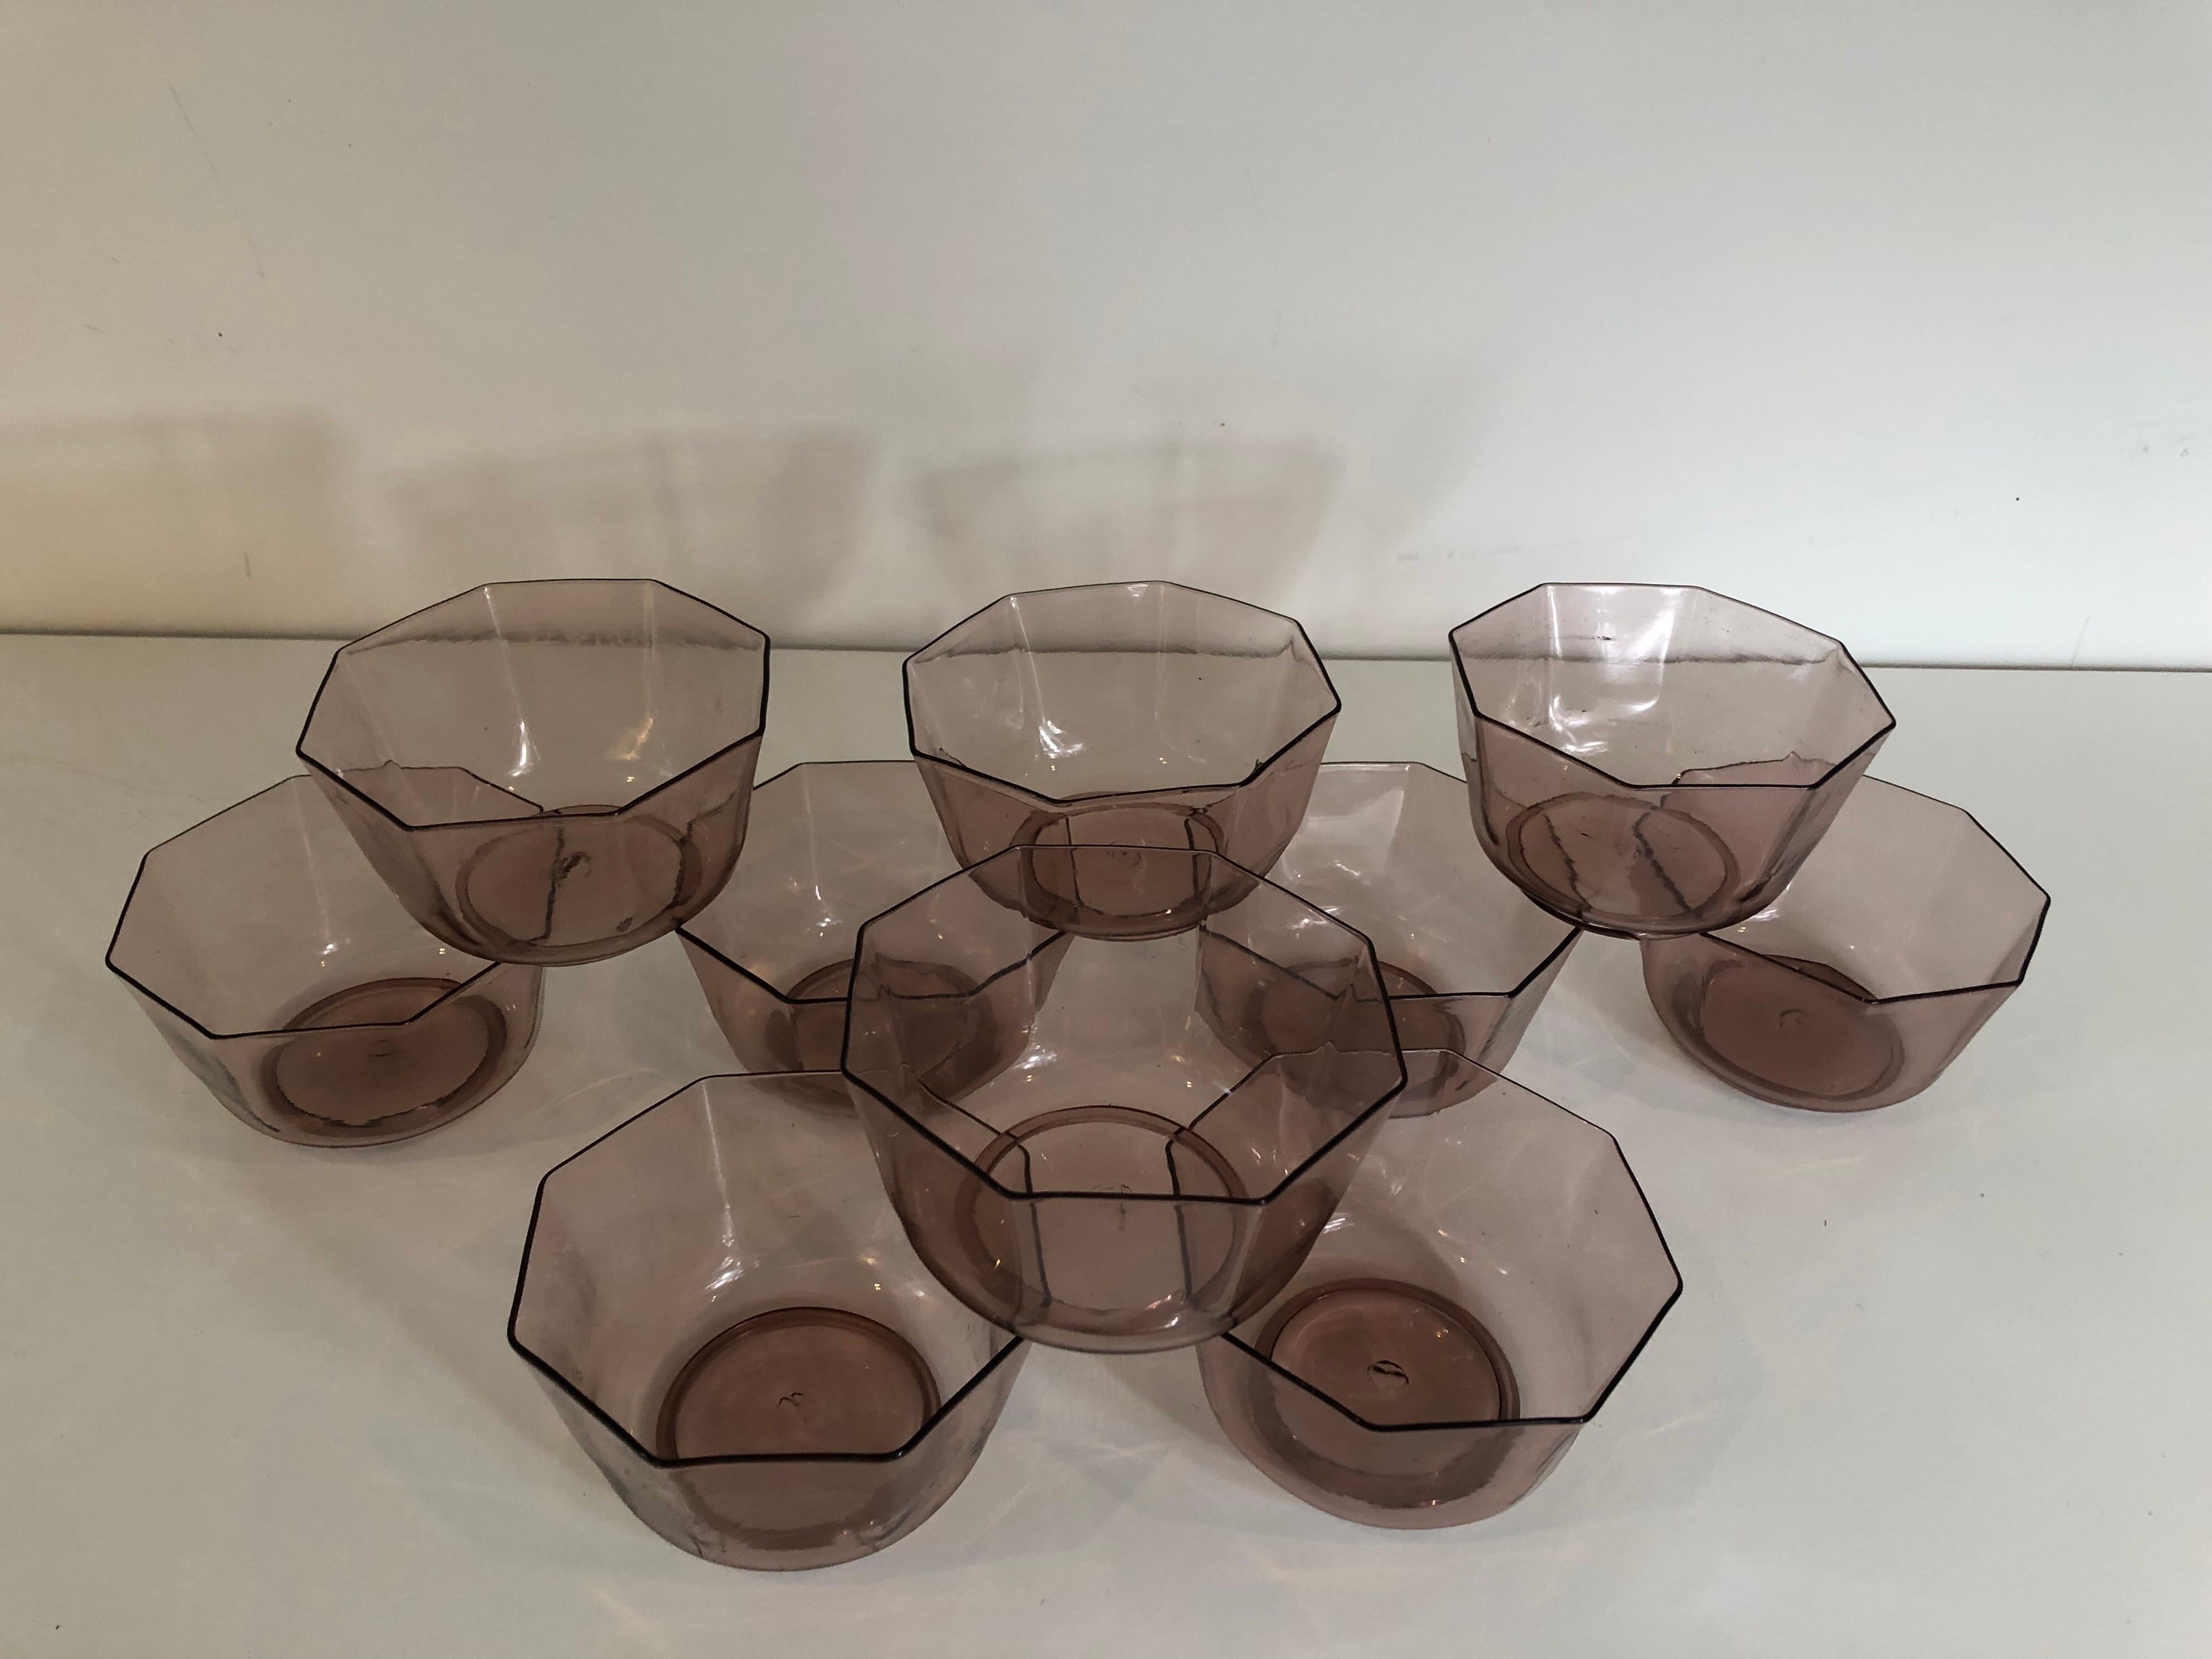 A set of ten amber Venetian glass bowls or cups. Matching set of plates also available.